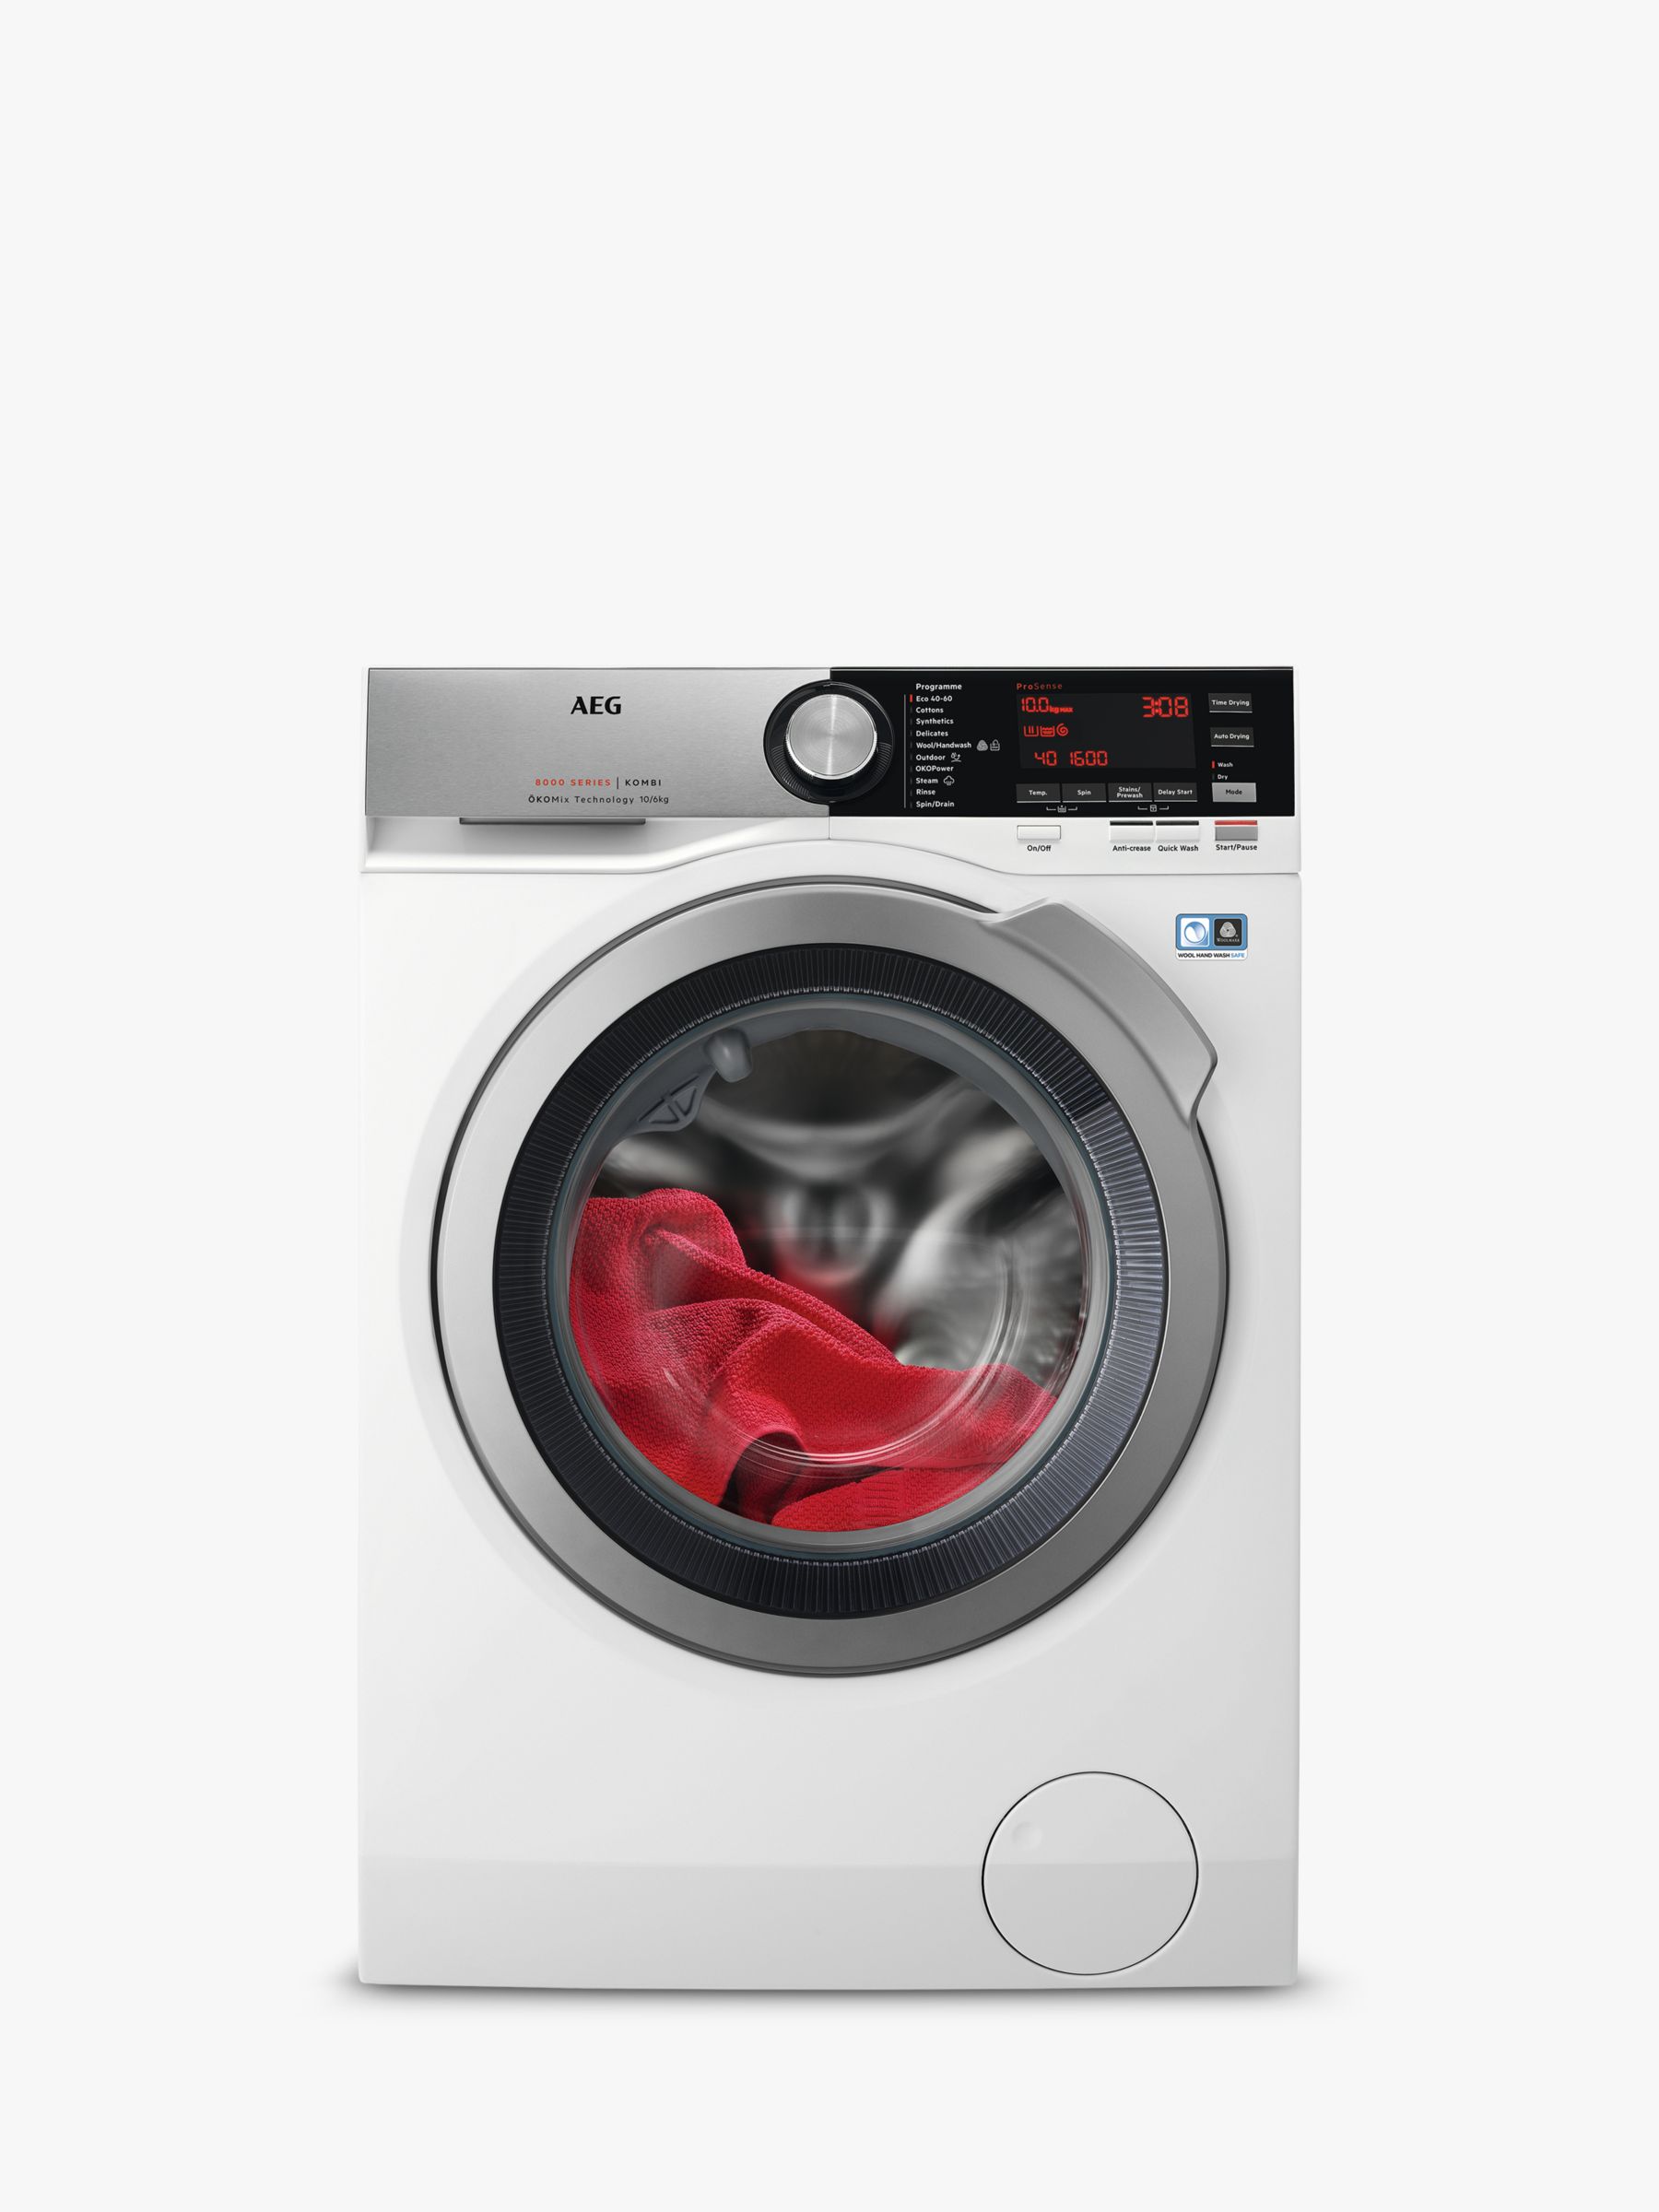 AEG L8WEC166R Freestanding Washer Dryer, 10kg Wash/6kg Dry Load, A Energy Rating, 1600rpm Spin, White